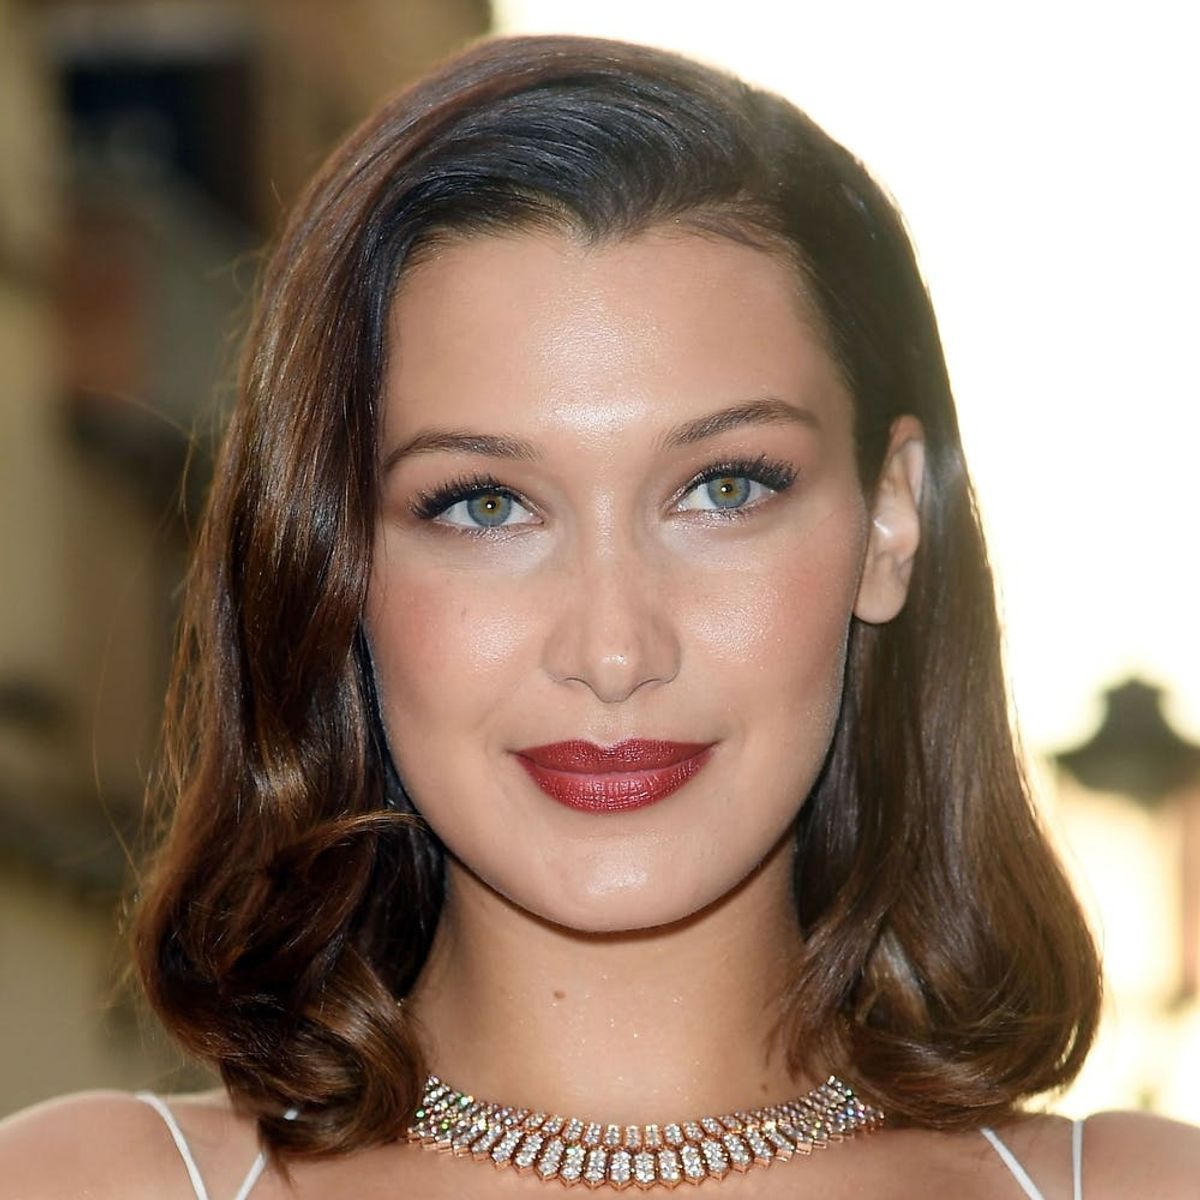 Bella Hadid Just Channeled a Modern Day Marilyn Monroe on the Red Carpet in Venice